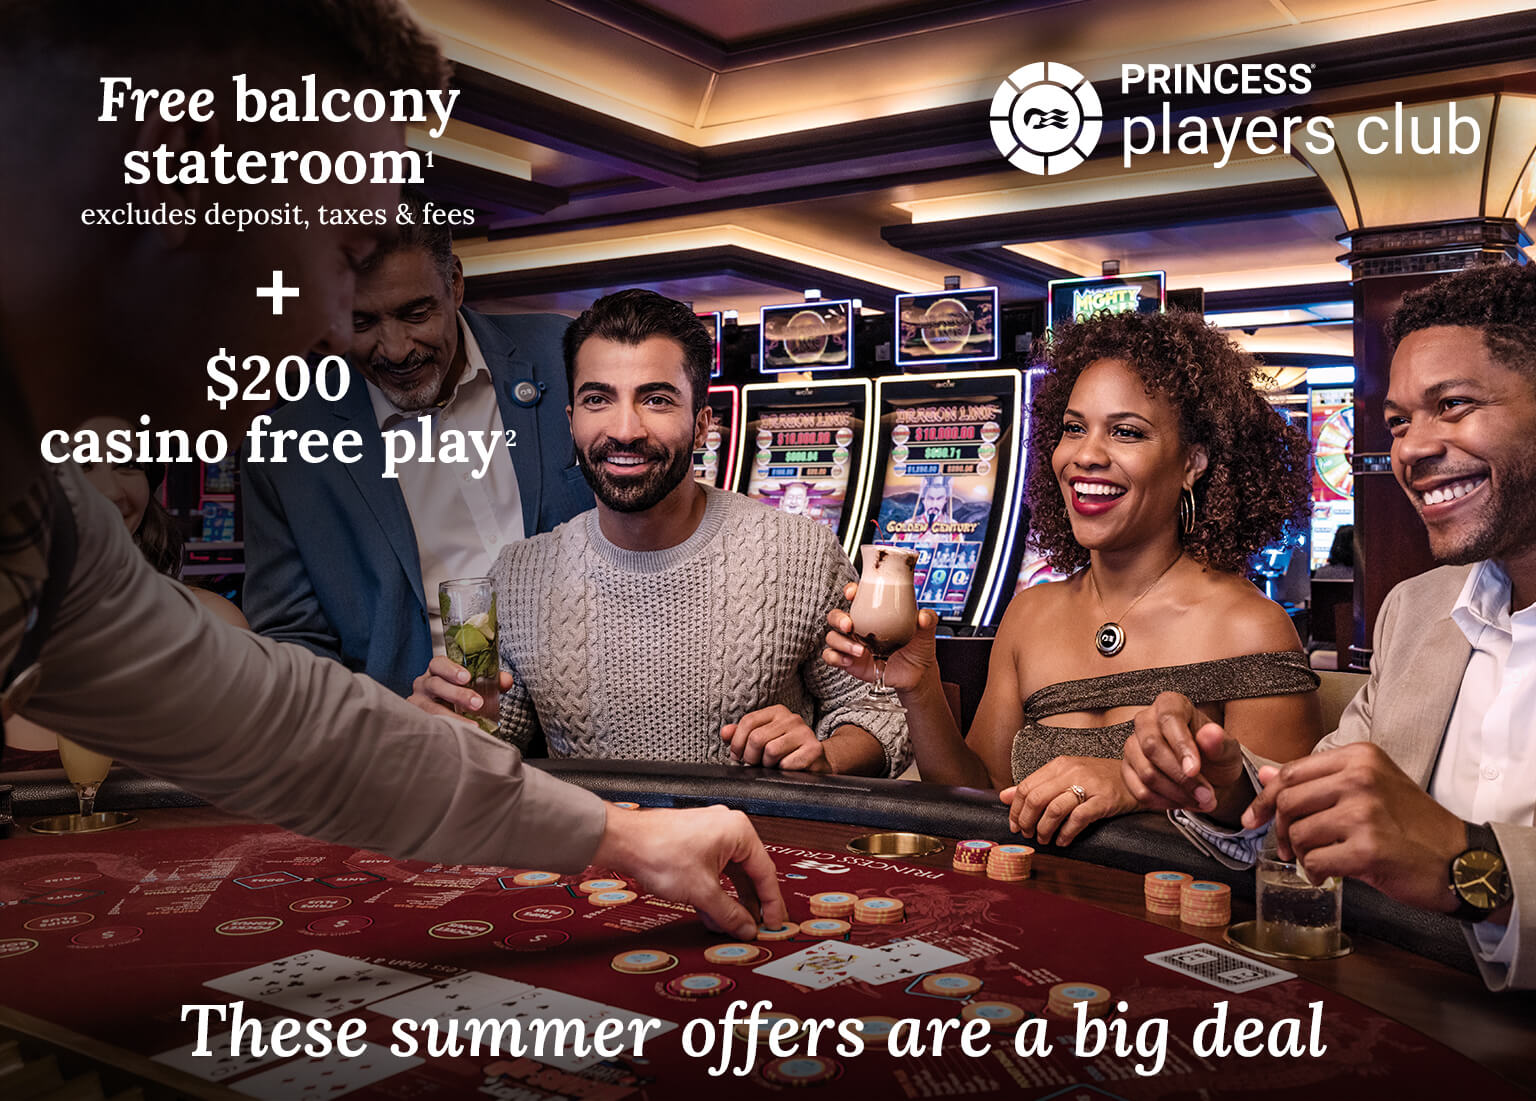 free balcony stateroom + $200 casino free play. Click here to book.